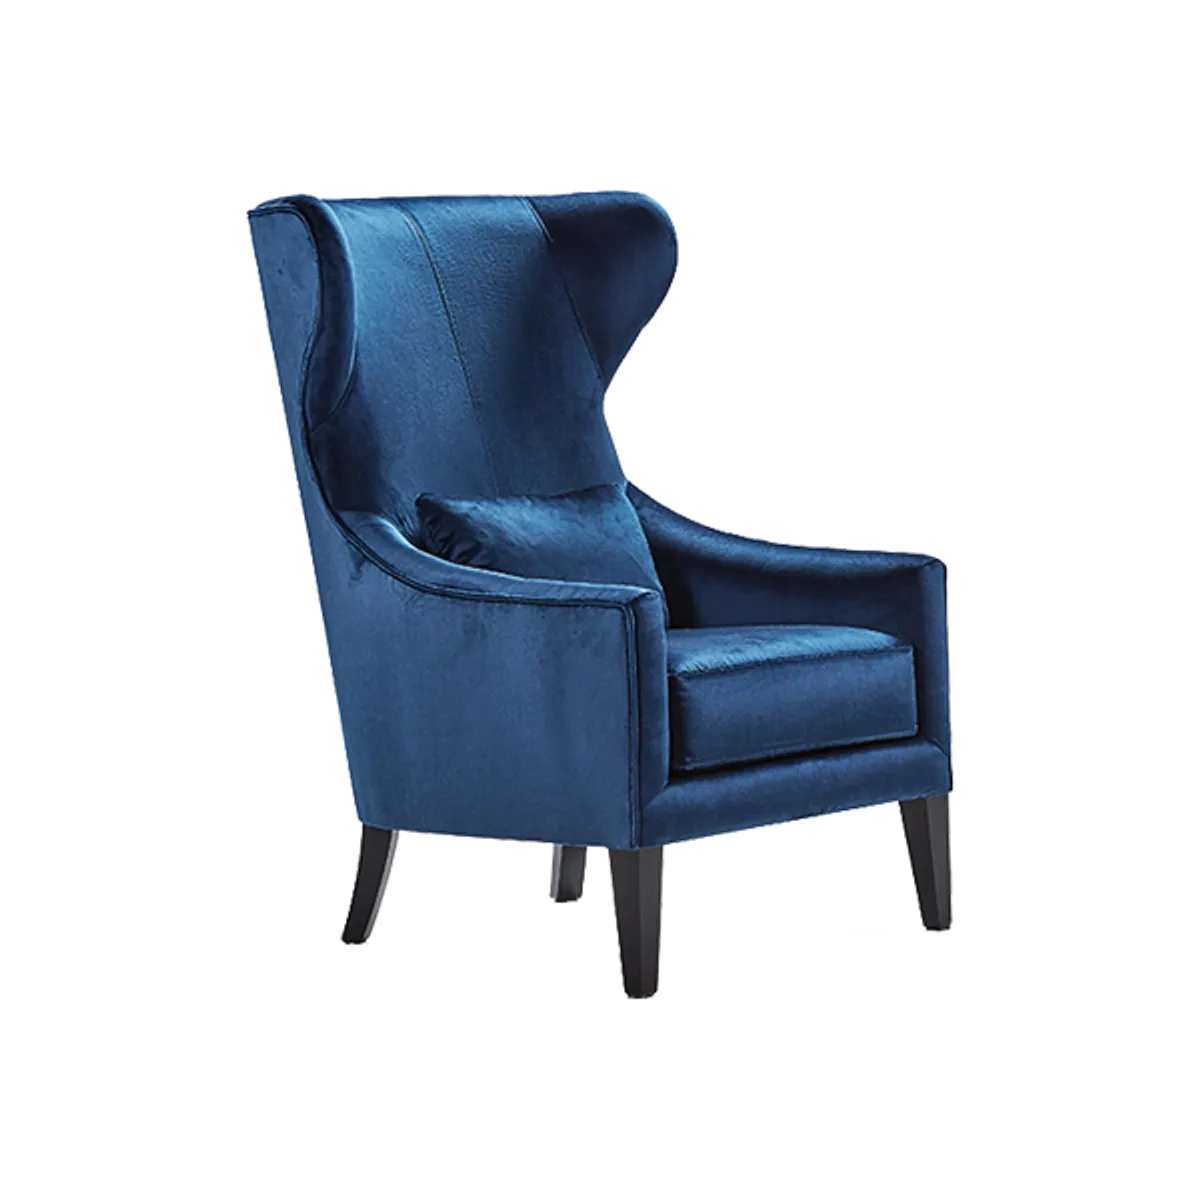 Web Vala Wing Back Chair Furniture For Boutique Restaurants And Cafes 1915